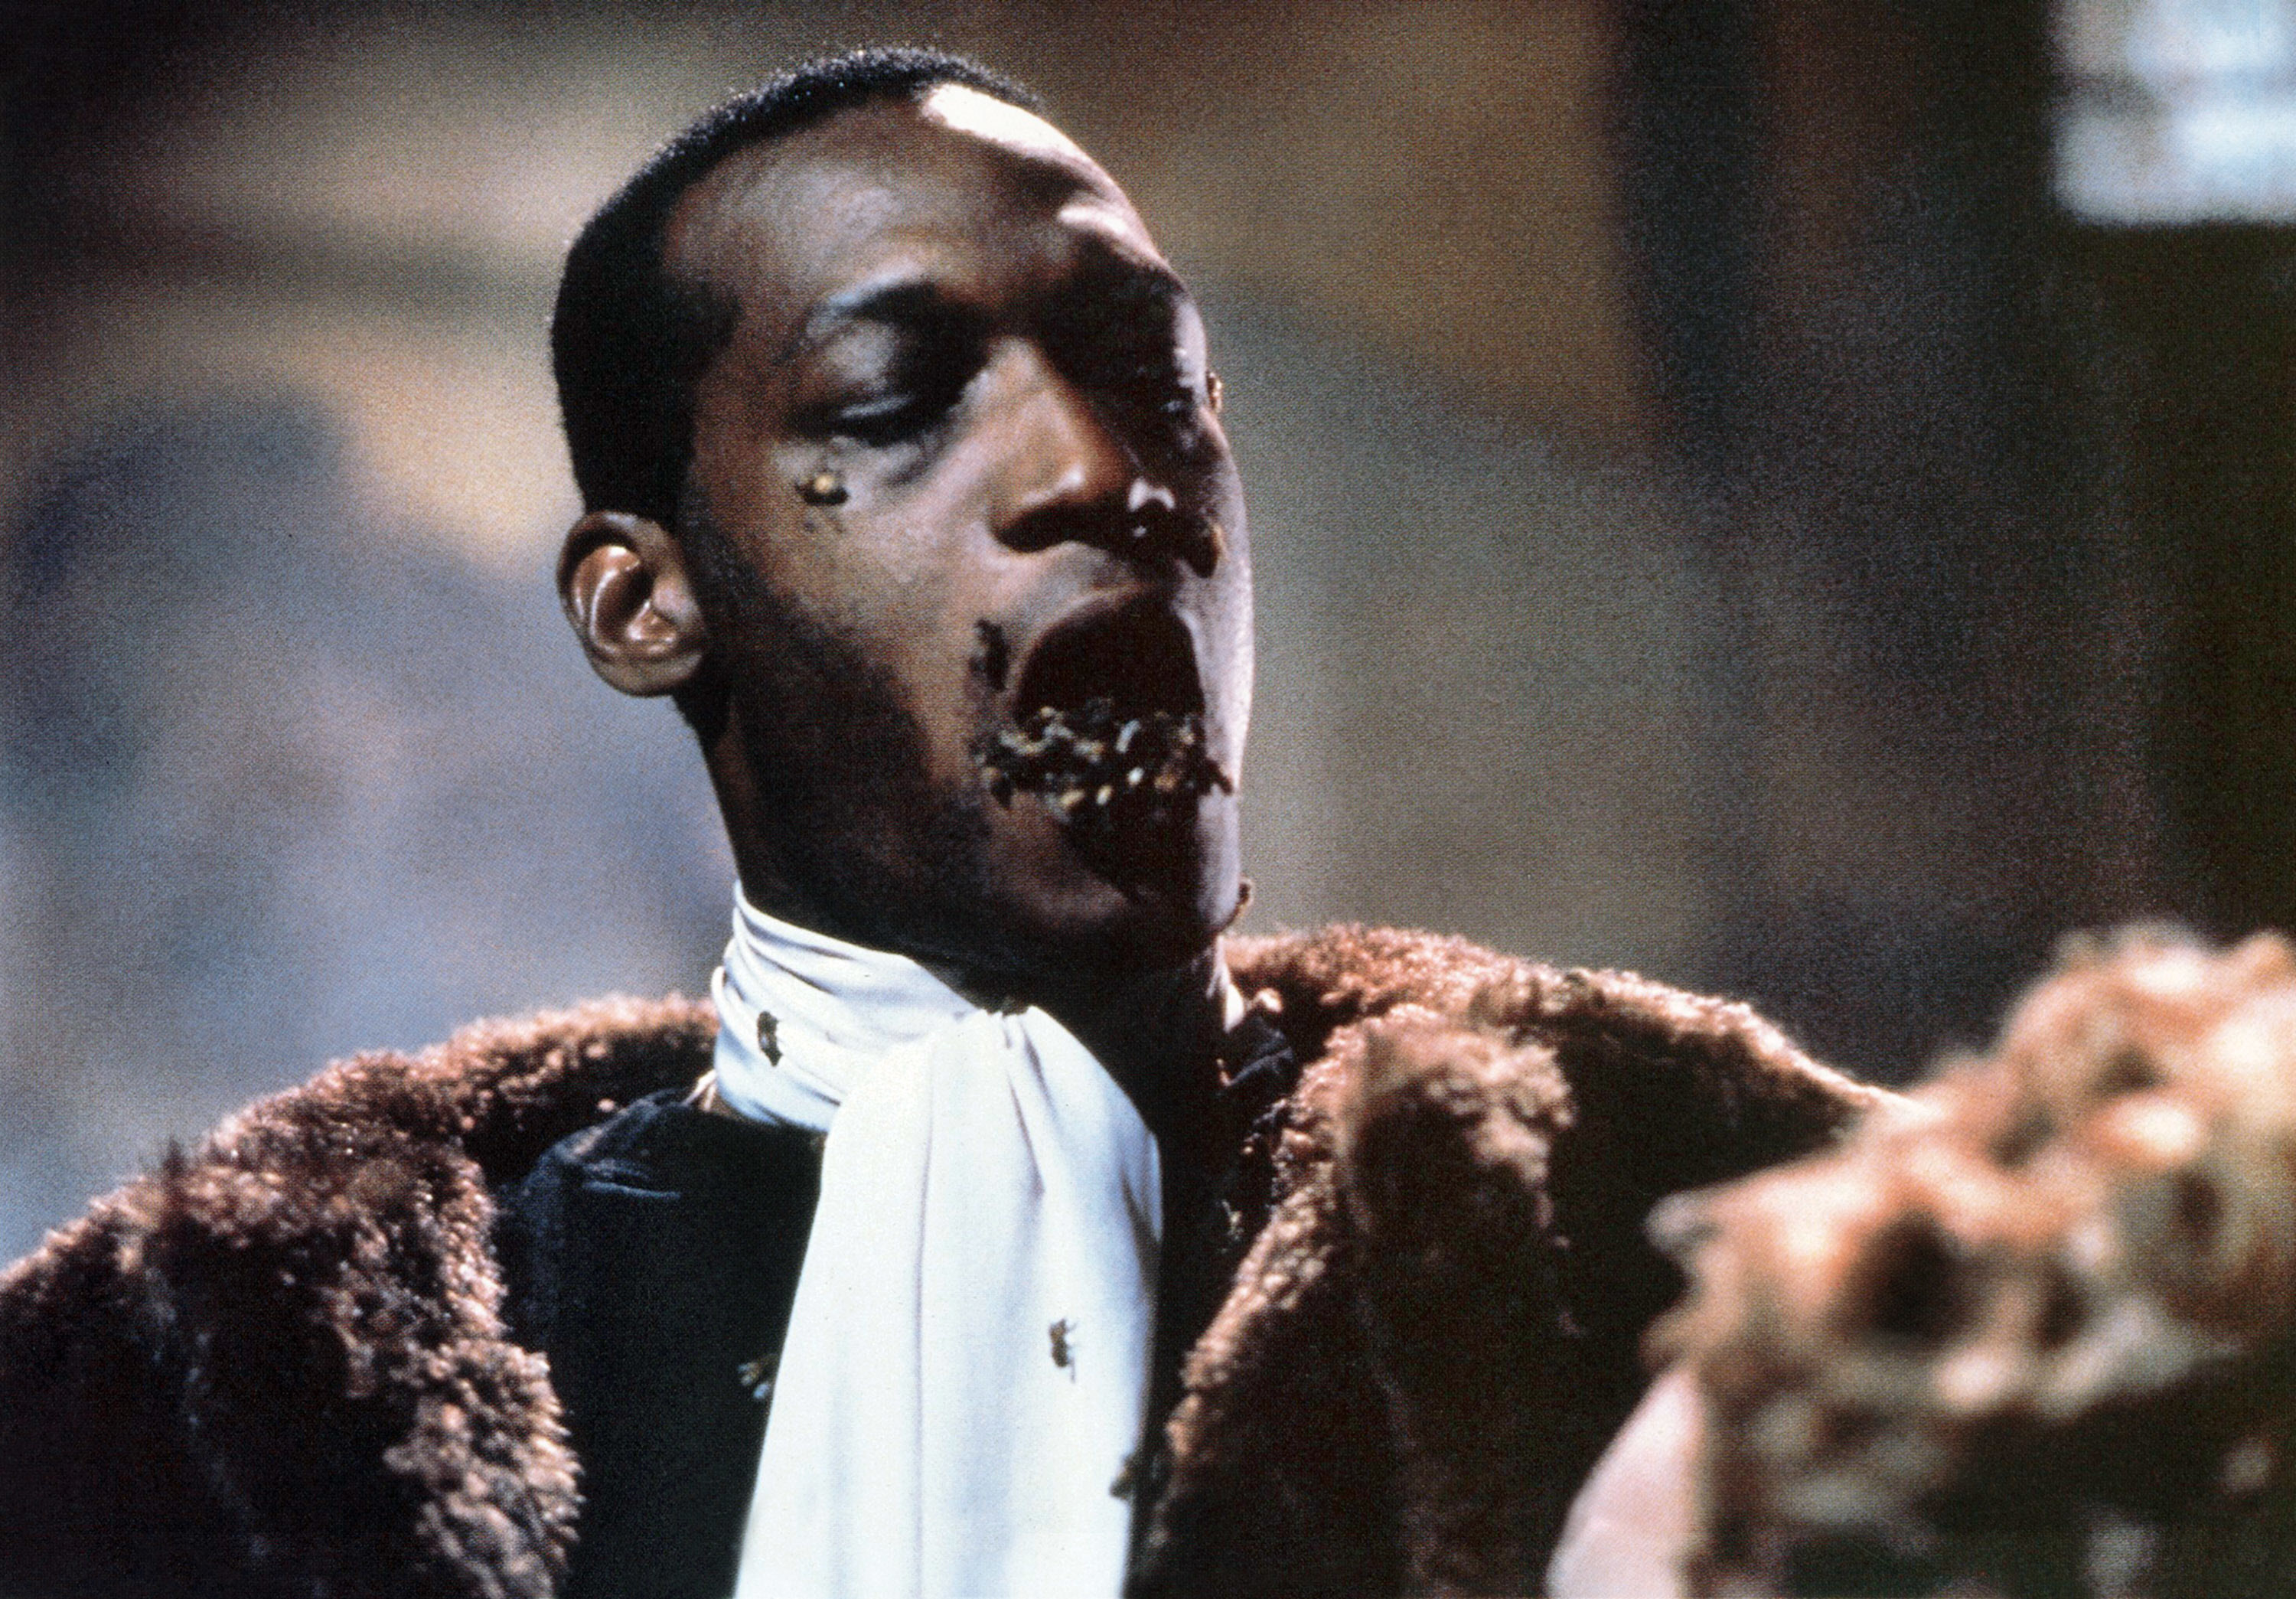 Tony Todd has bees coming out of his mouth